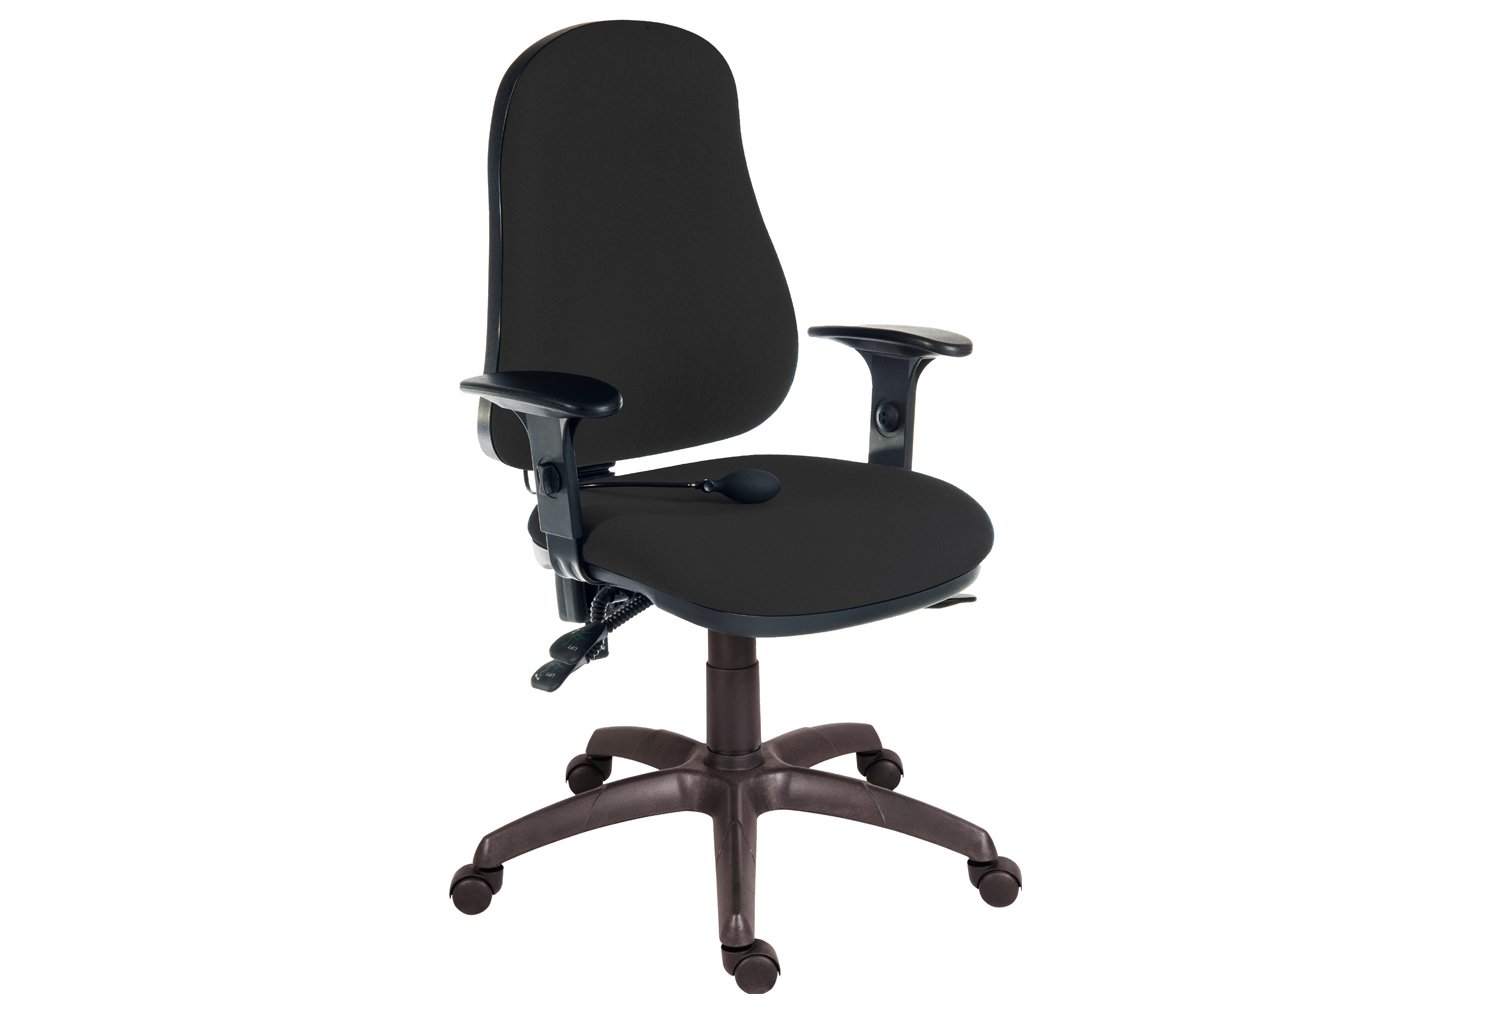 Comfort Ergo Air Operator Office Chair With Adjustable Arms (Fabric), Black